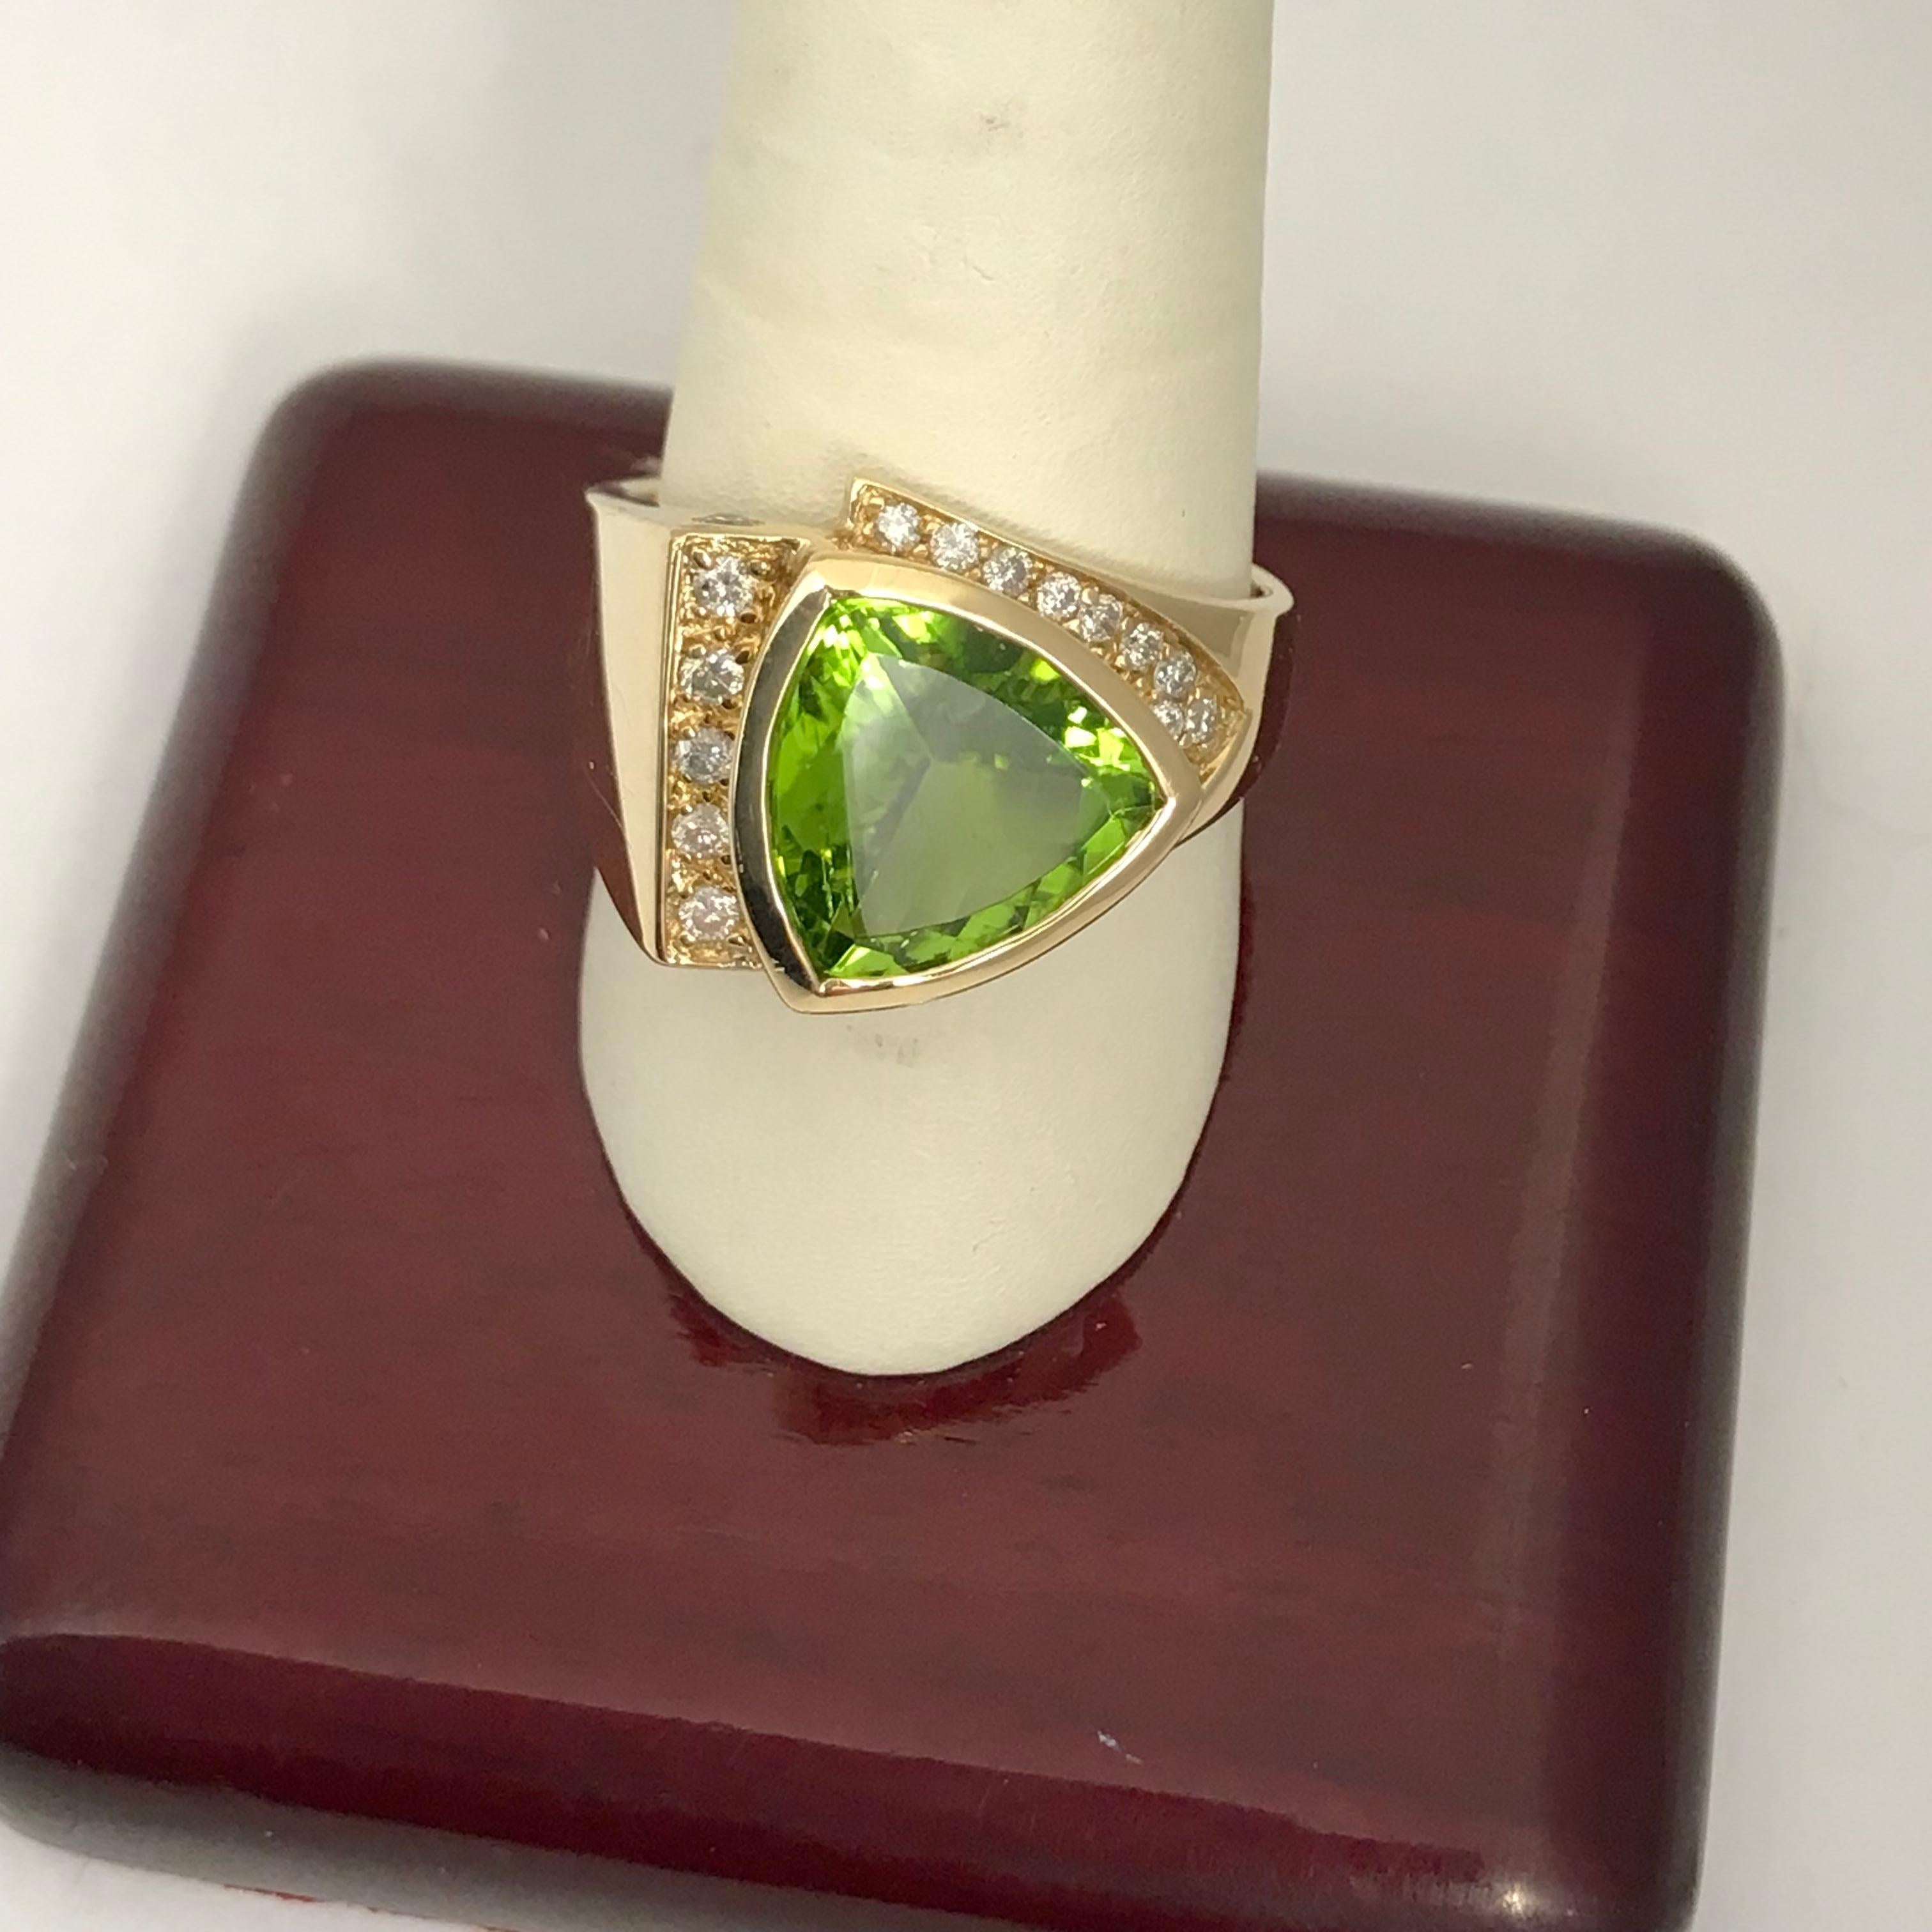 5.11 Carat Peridot Ring in 14K Yellow Gold
This ring is made from 14k yellow gold and features a 5.11 ct Peridot and .46 cts total weight in Diamonds.  It is 100% natural in color nothing about it has been changed. Nature does some amazing things.